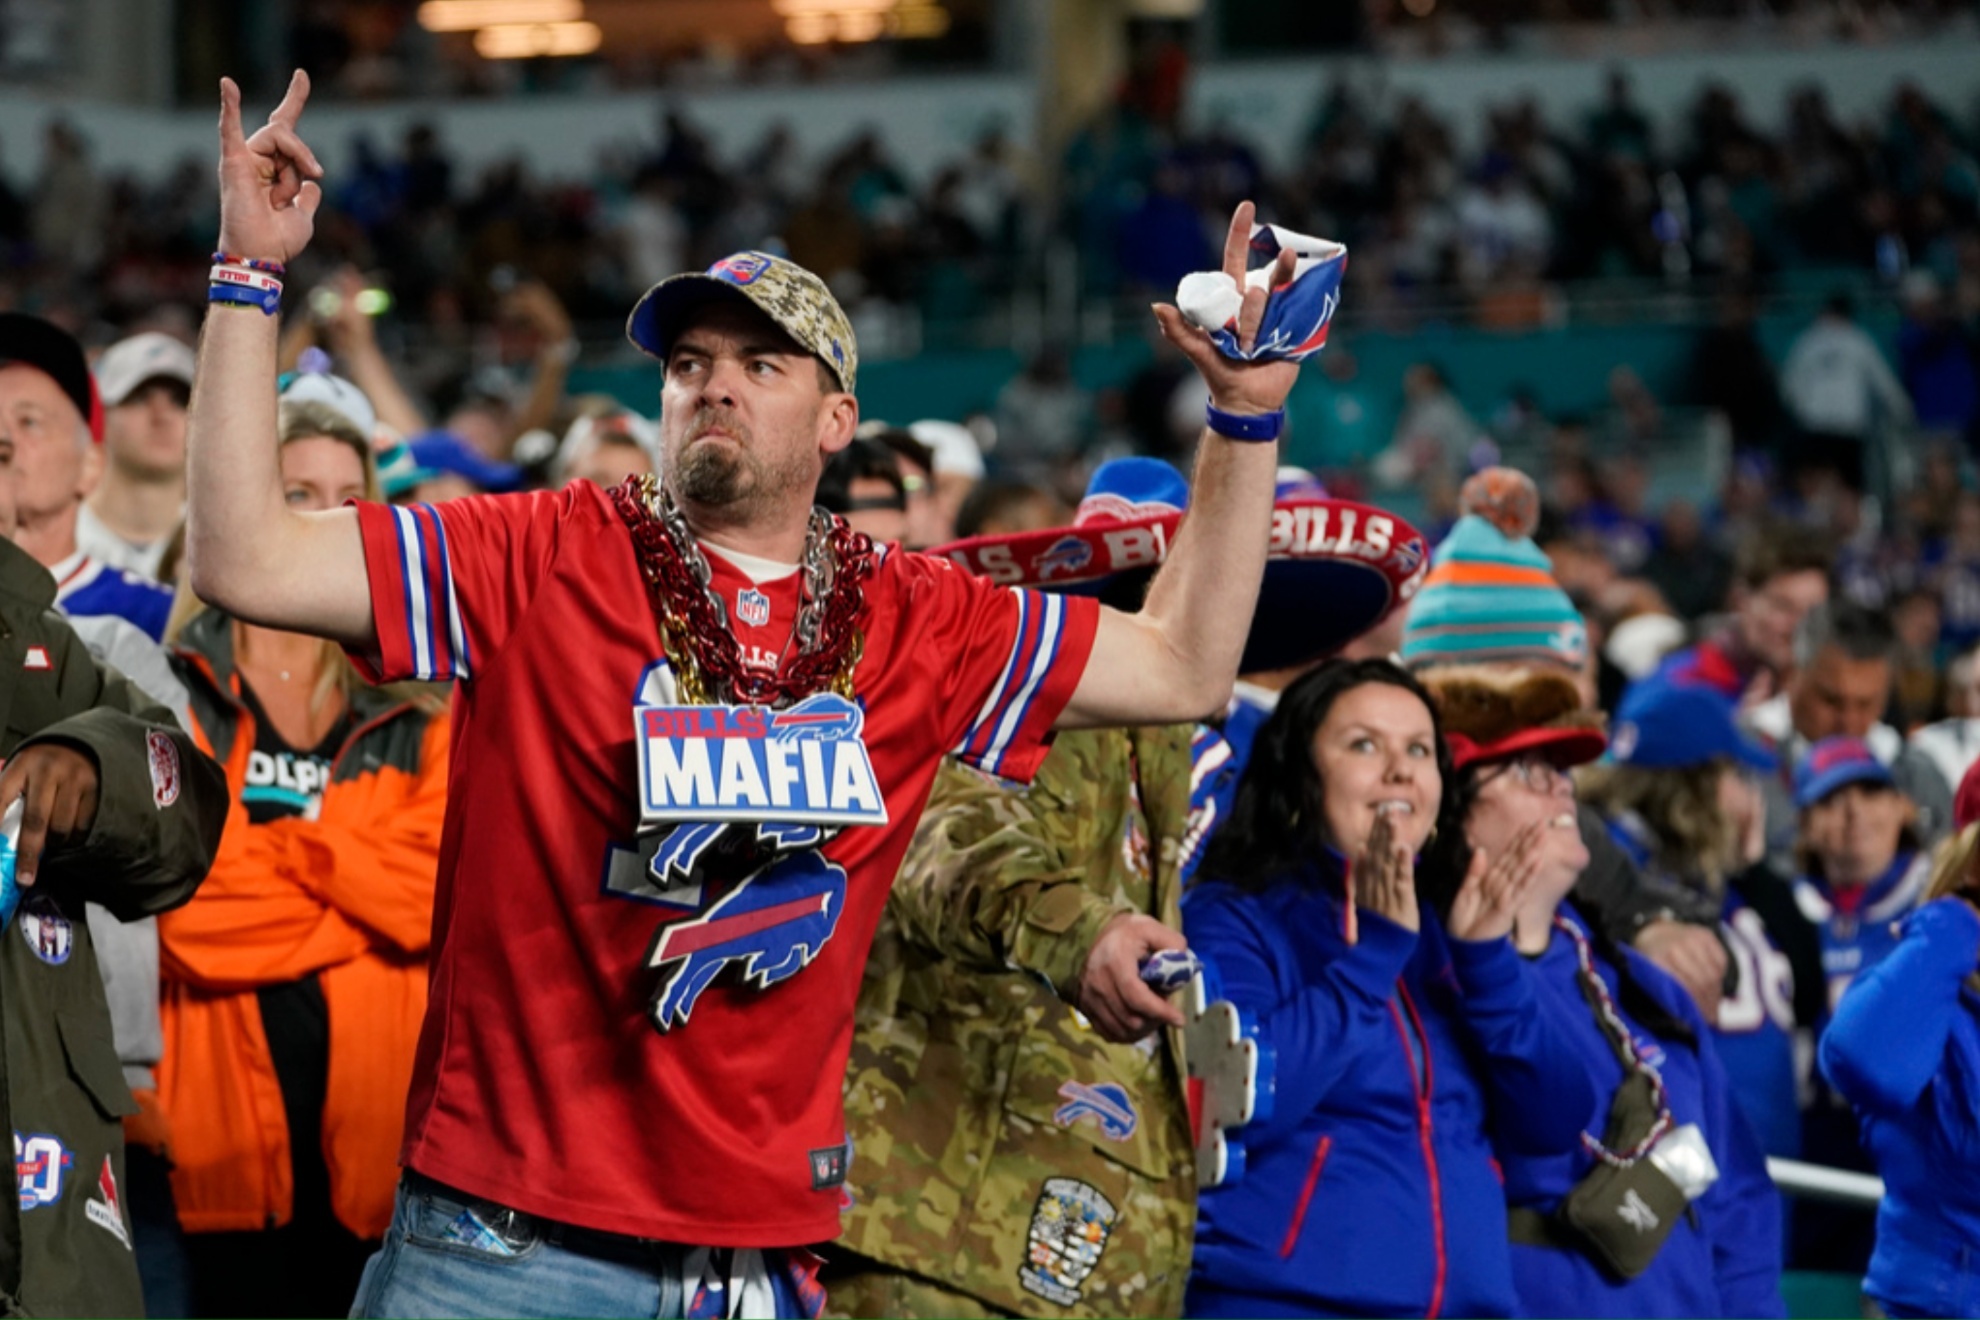 The Bills Mafia rejoice with the victory over the Dolphins.